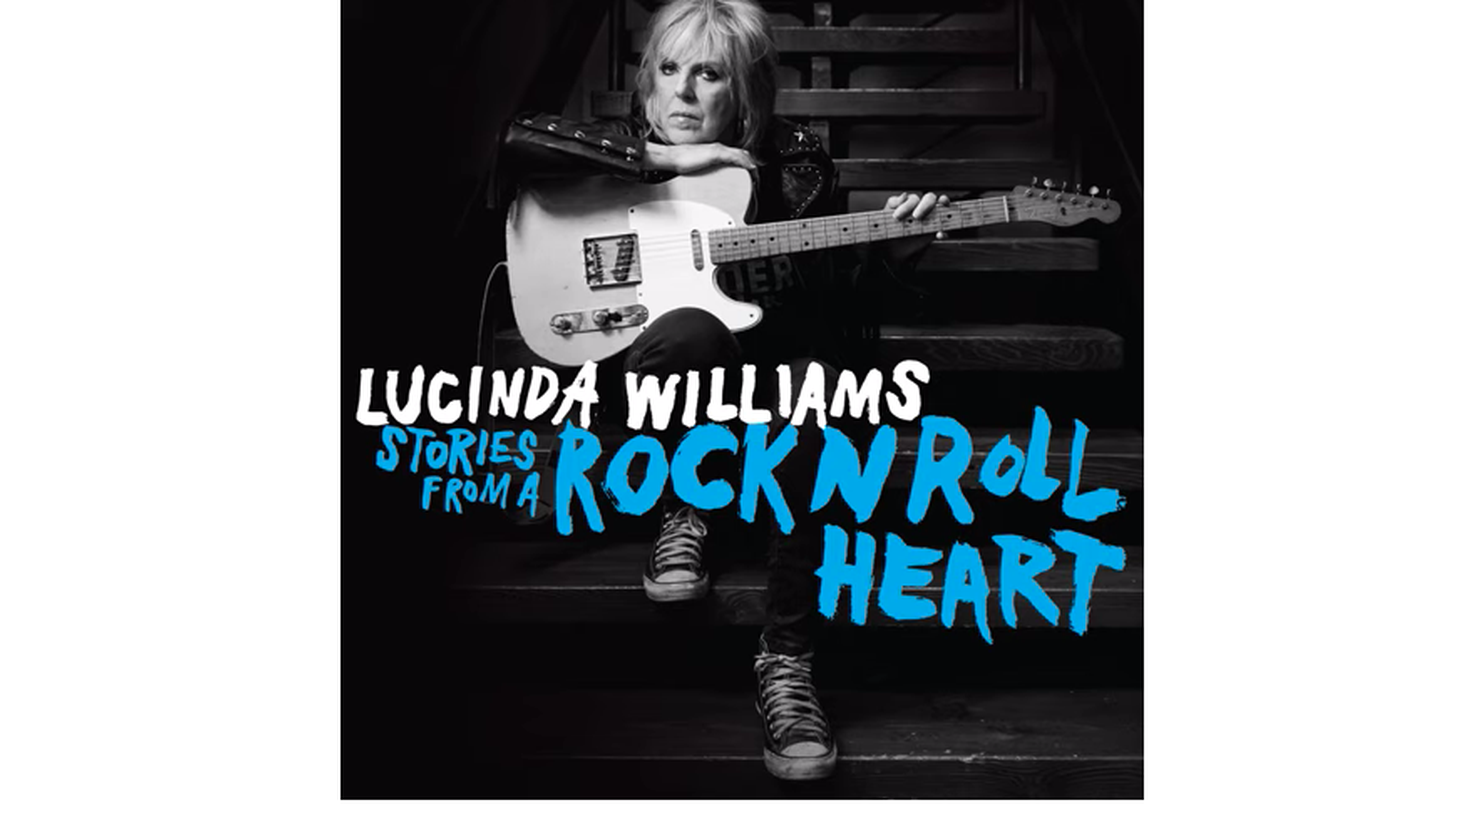 Anne Litt recommends Lucinda Williams’ “Where the Song Will Find Me.”